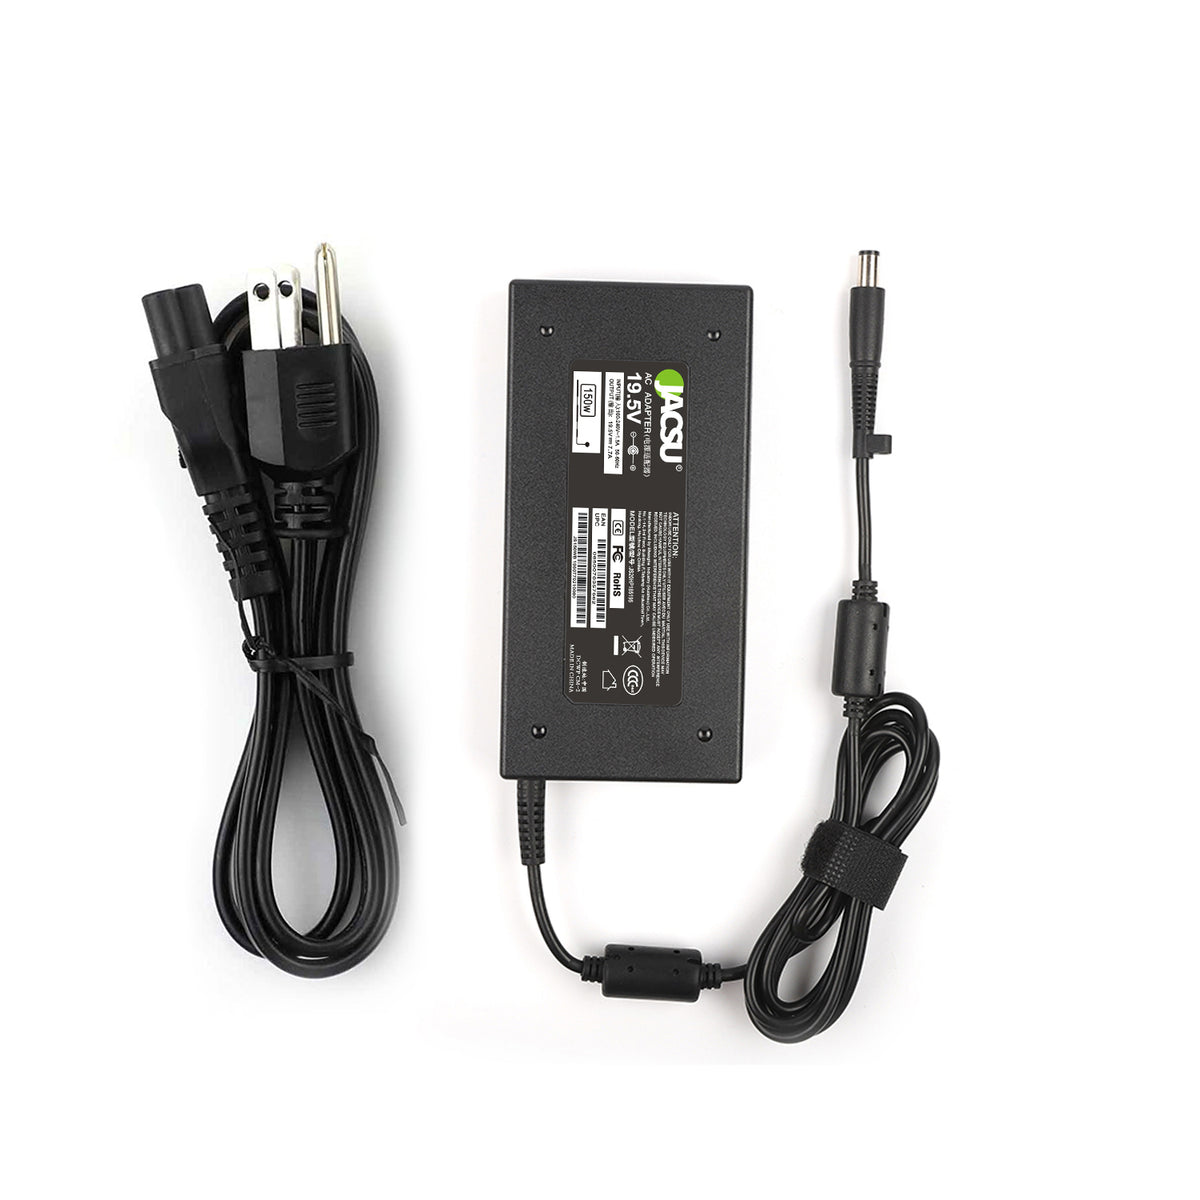 Jacsu 19.5V 7.7A PIN SIZE 7.4X5.0 Laptop Charger Adapter For HP COMPAQ ELITEBOOK 8560W 8760W 8730W ELITE 8200